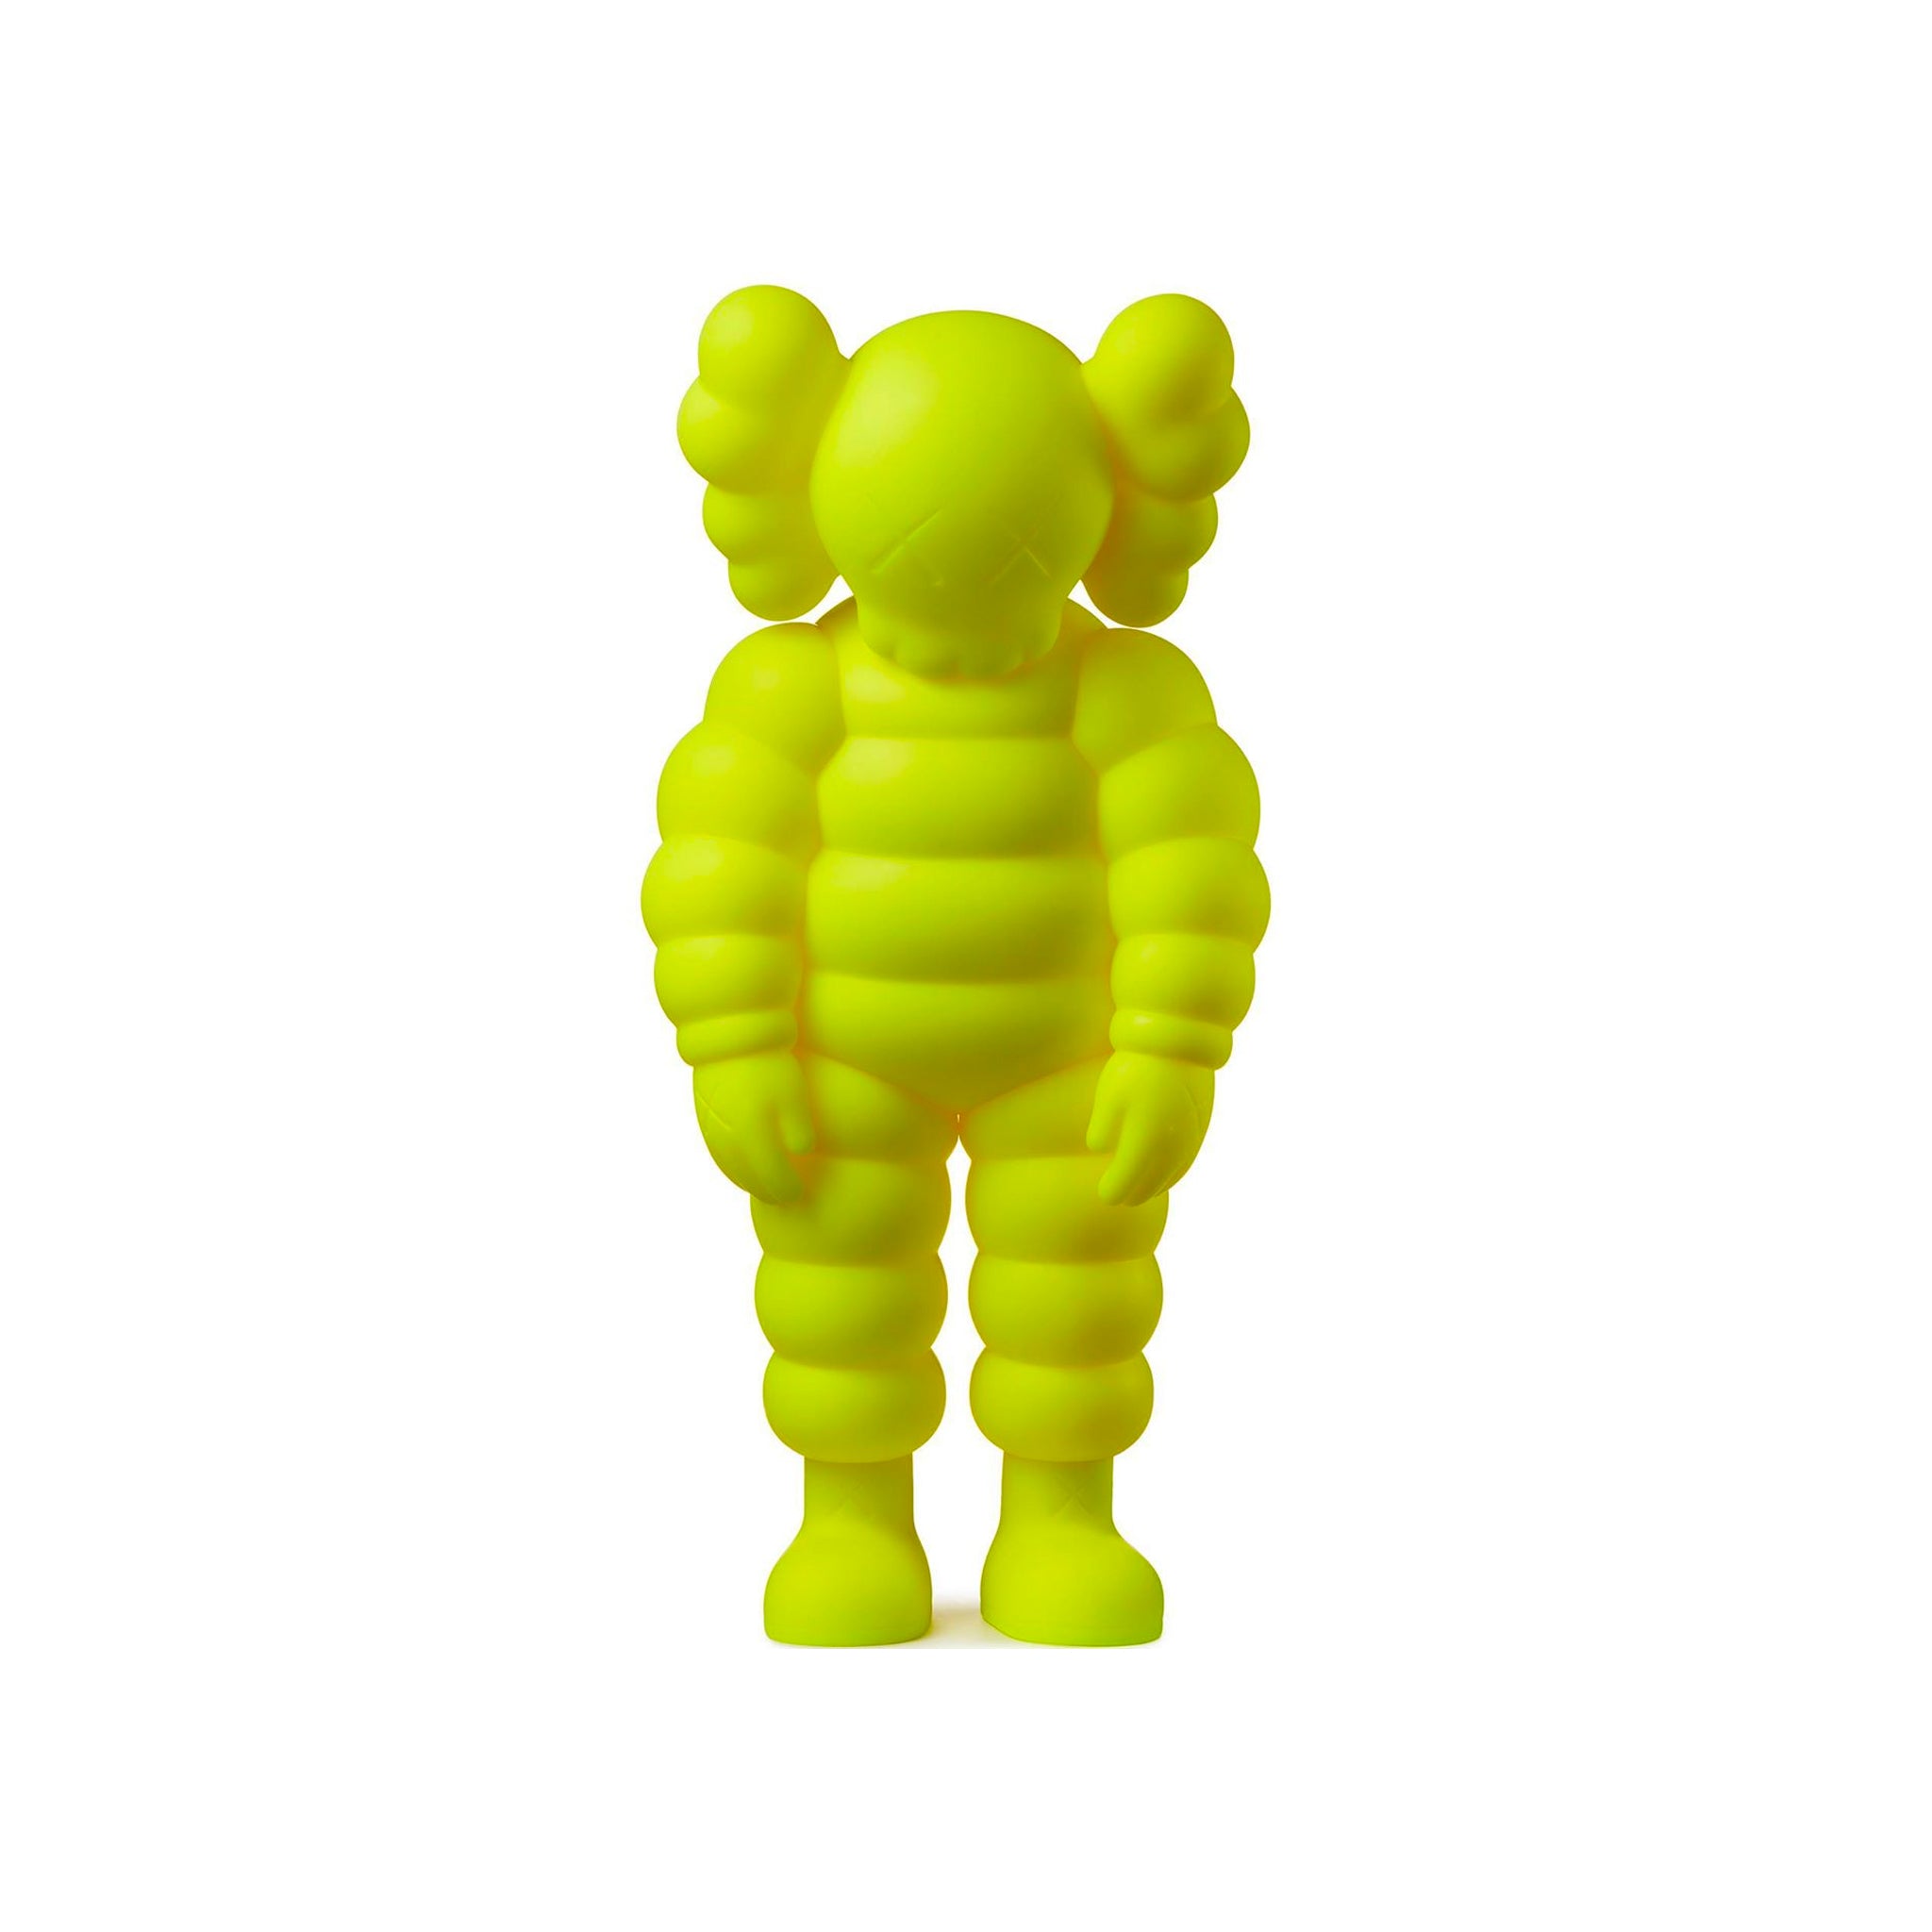 KAWS WHAT PARTY OPEN EDITION YELLOW